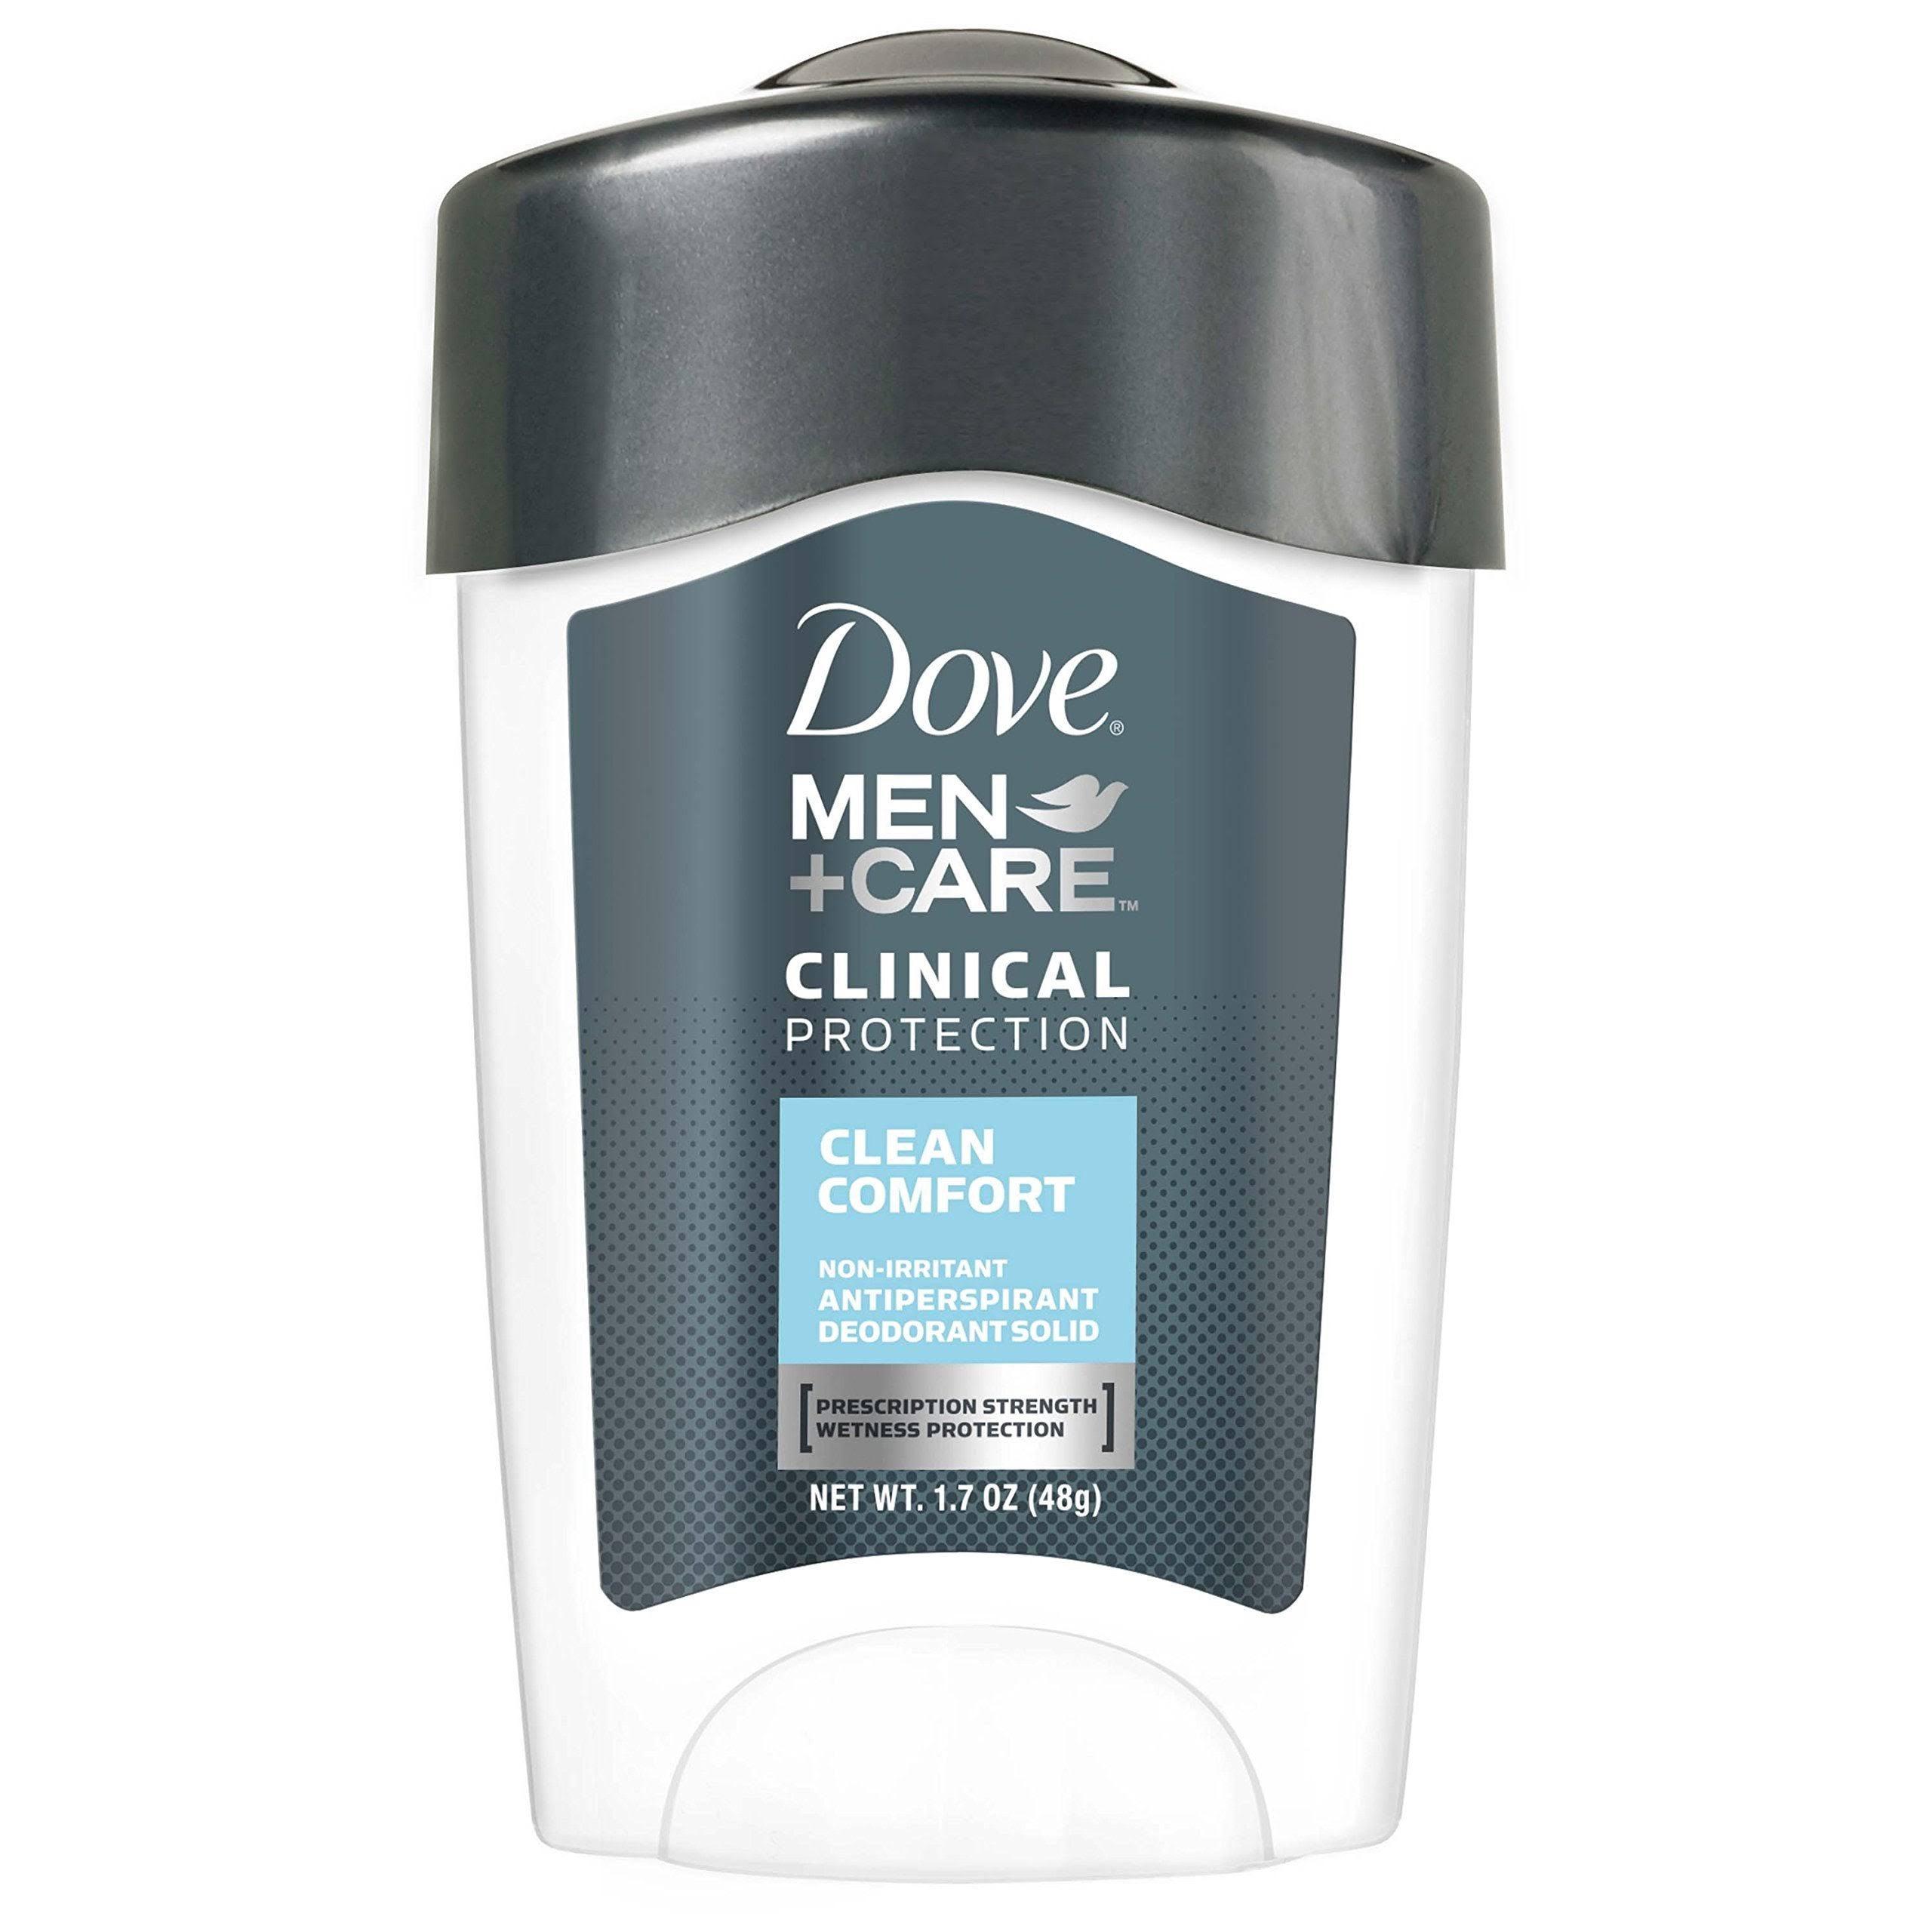 Dove Men + Care Clinical Protection Antiperspirant Solid Deodorant - Clean Comfort, 1.7 oz